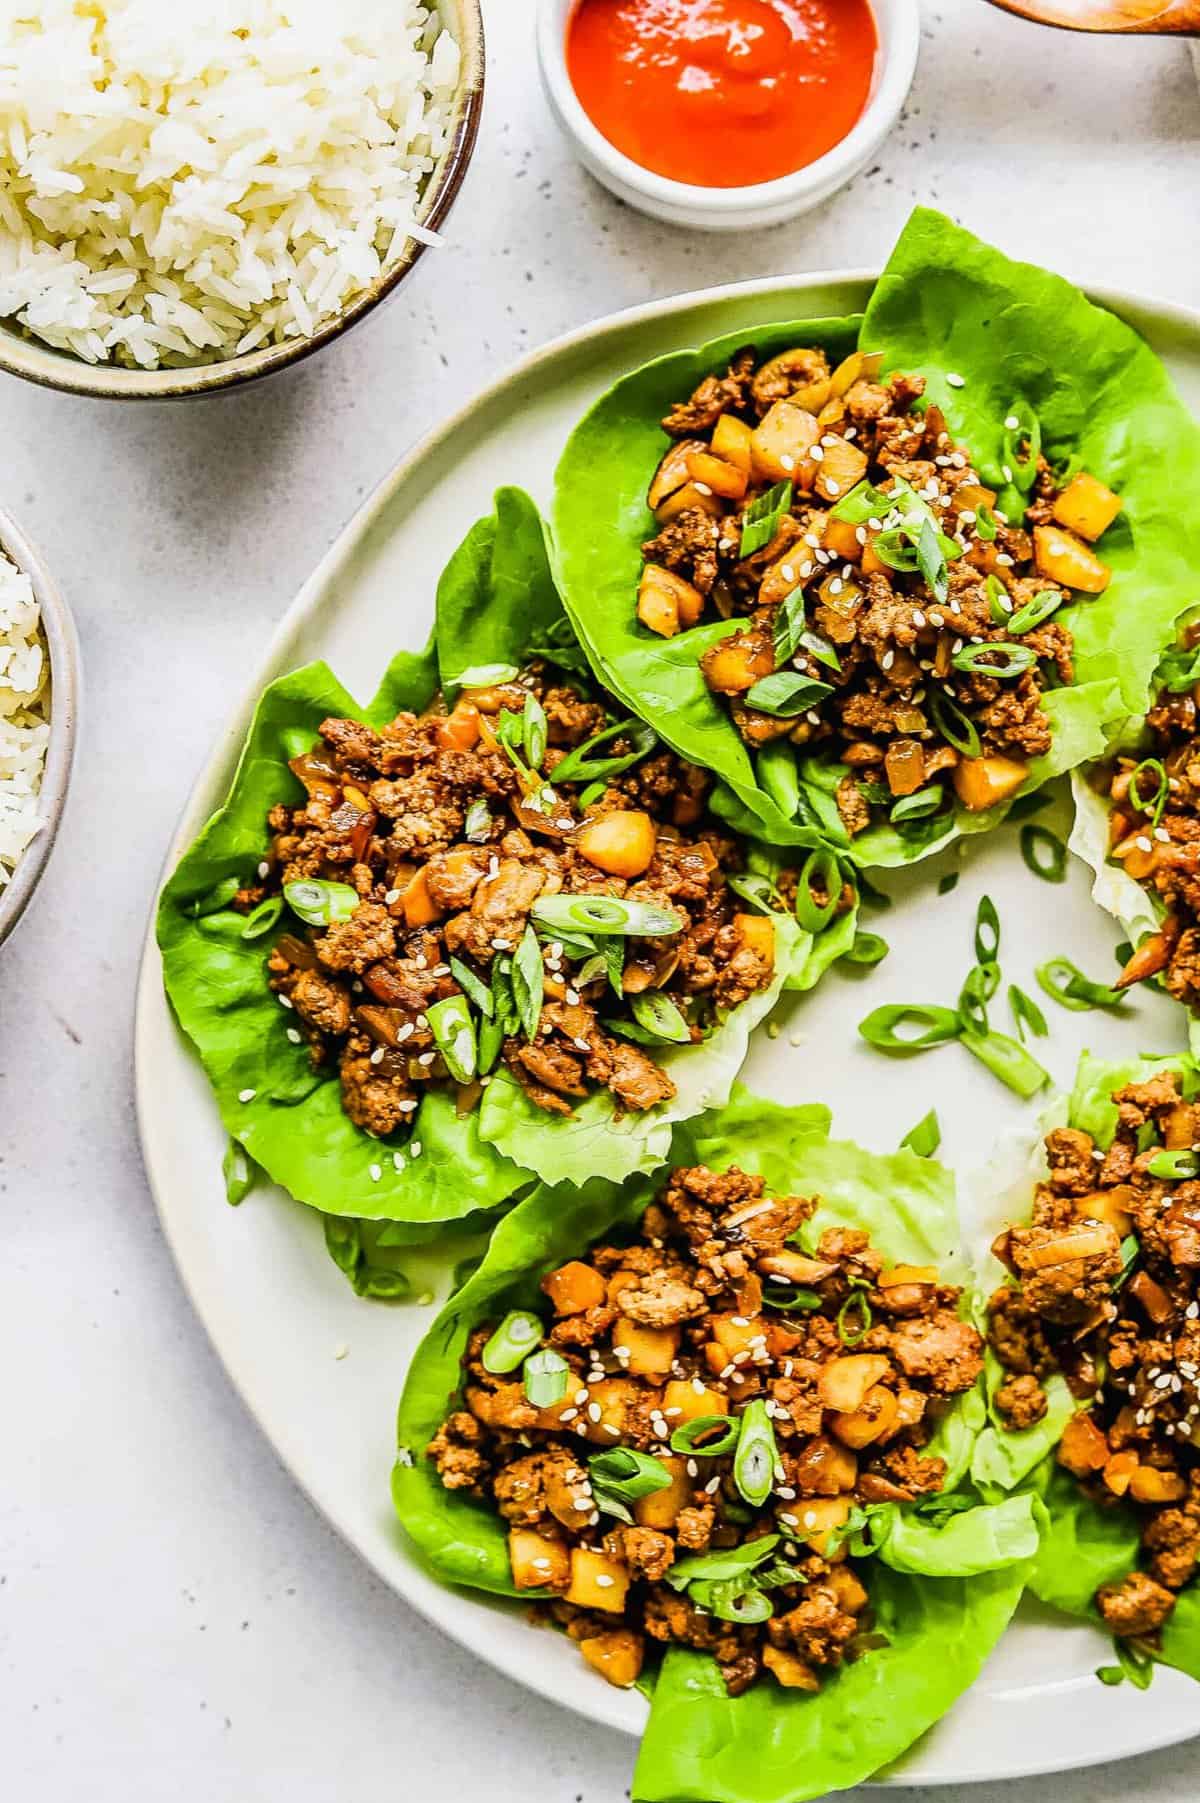 Plate of lettuce wraps with ground chicken, mushrooms, and water chestnuts.